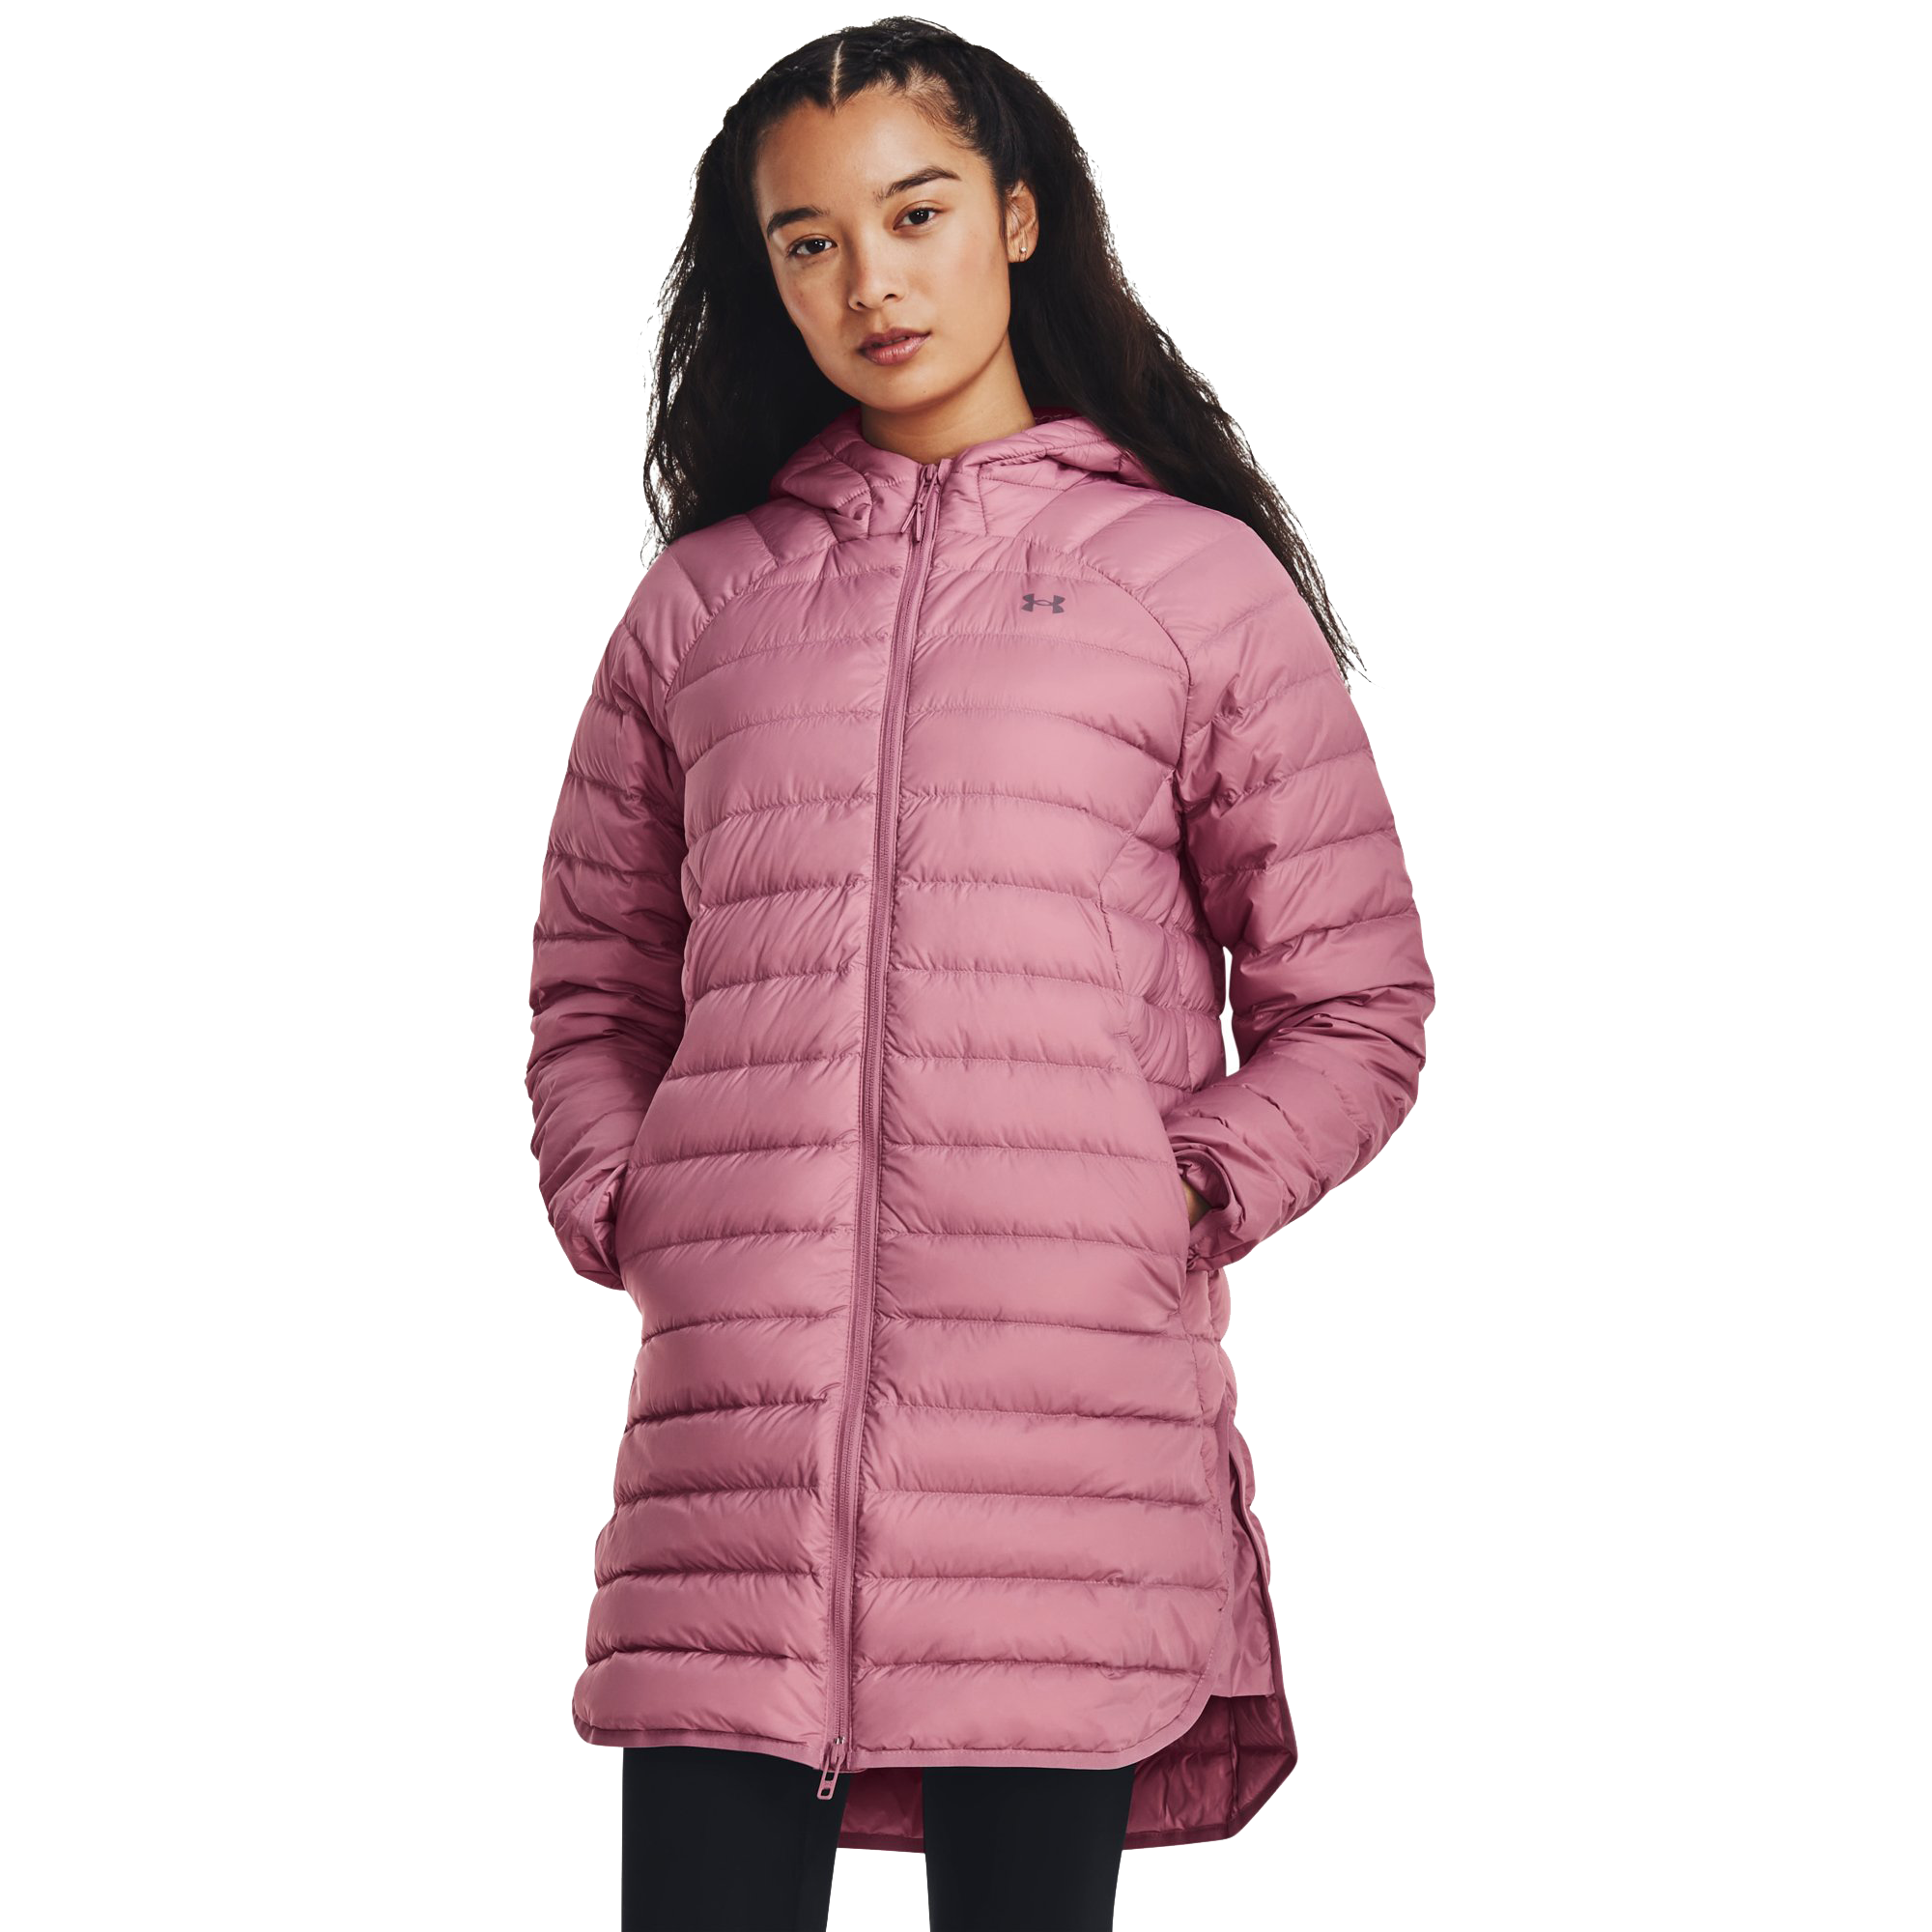 Under Armour Storm Armour Down 2.0 Parka for Ladies